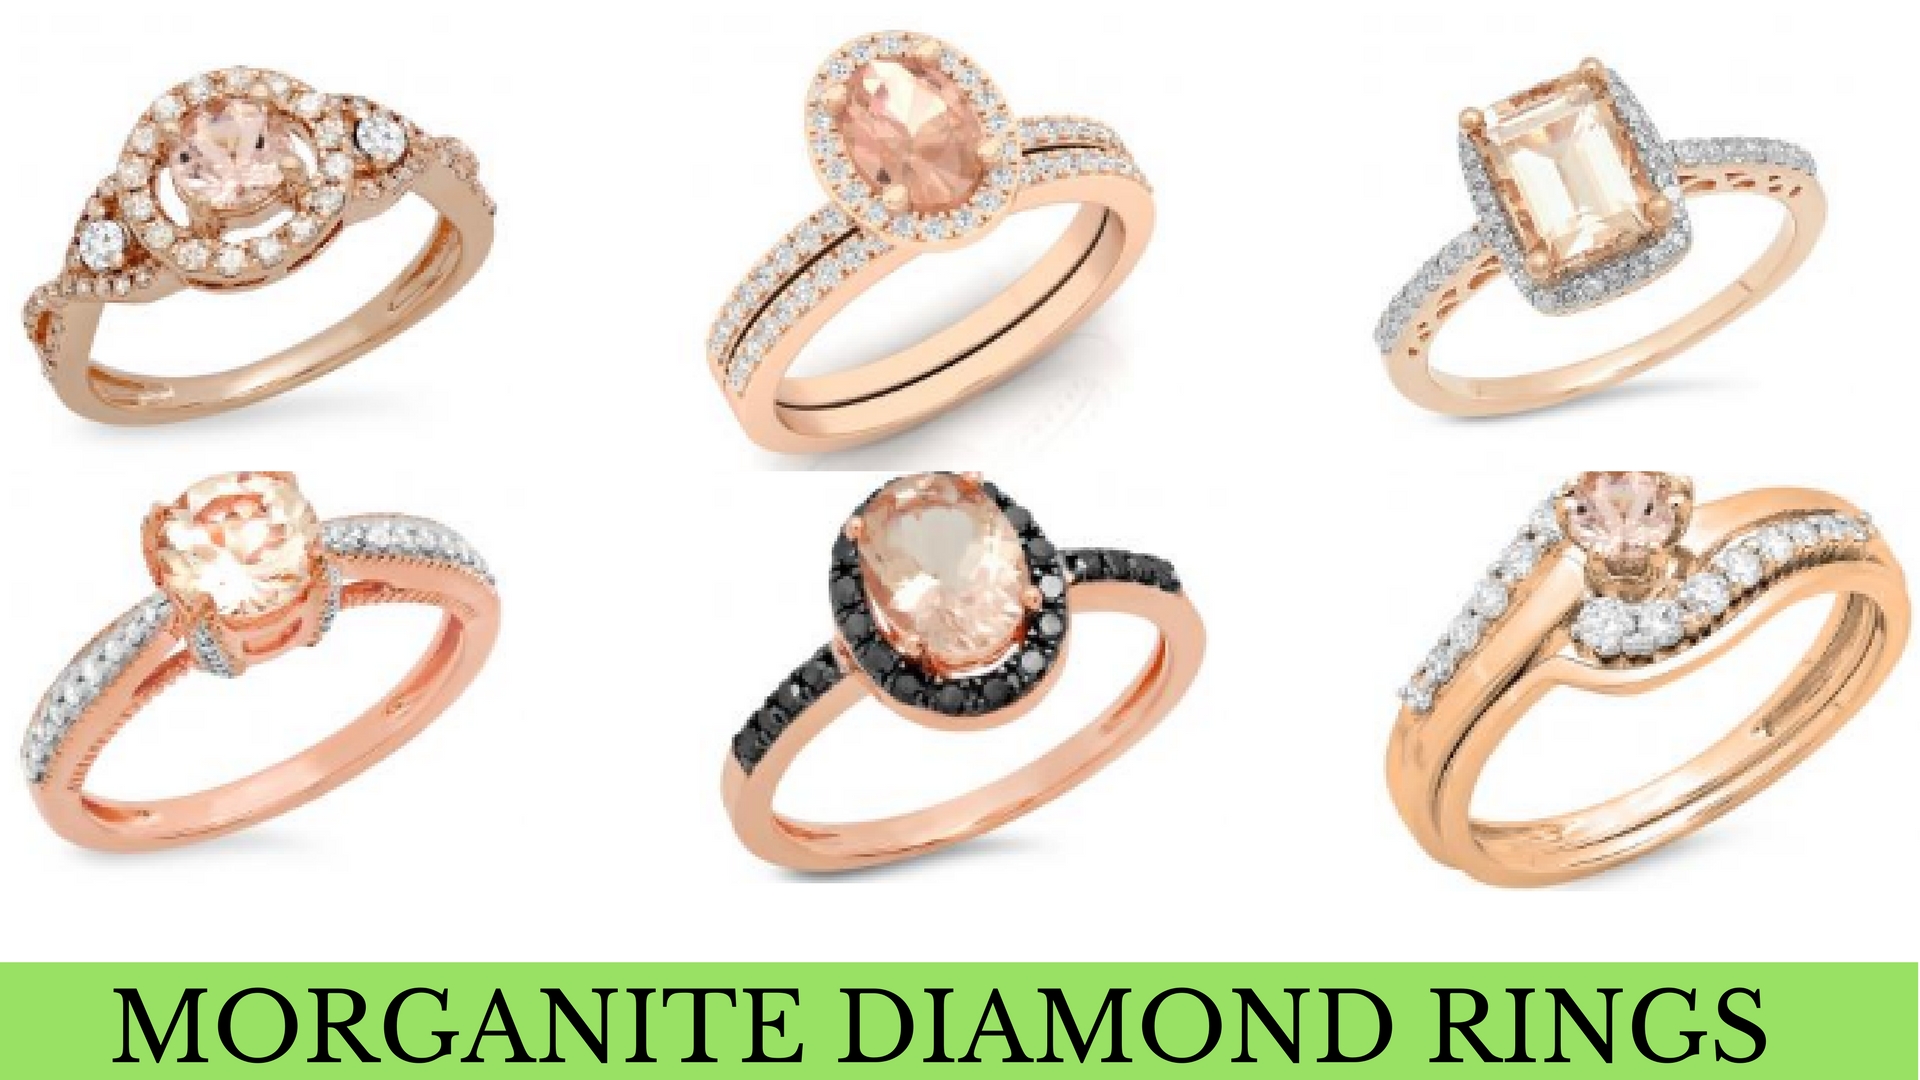 What is a Morganite Engagement Ring